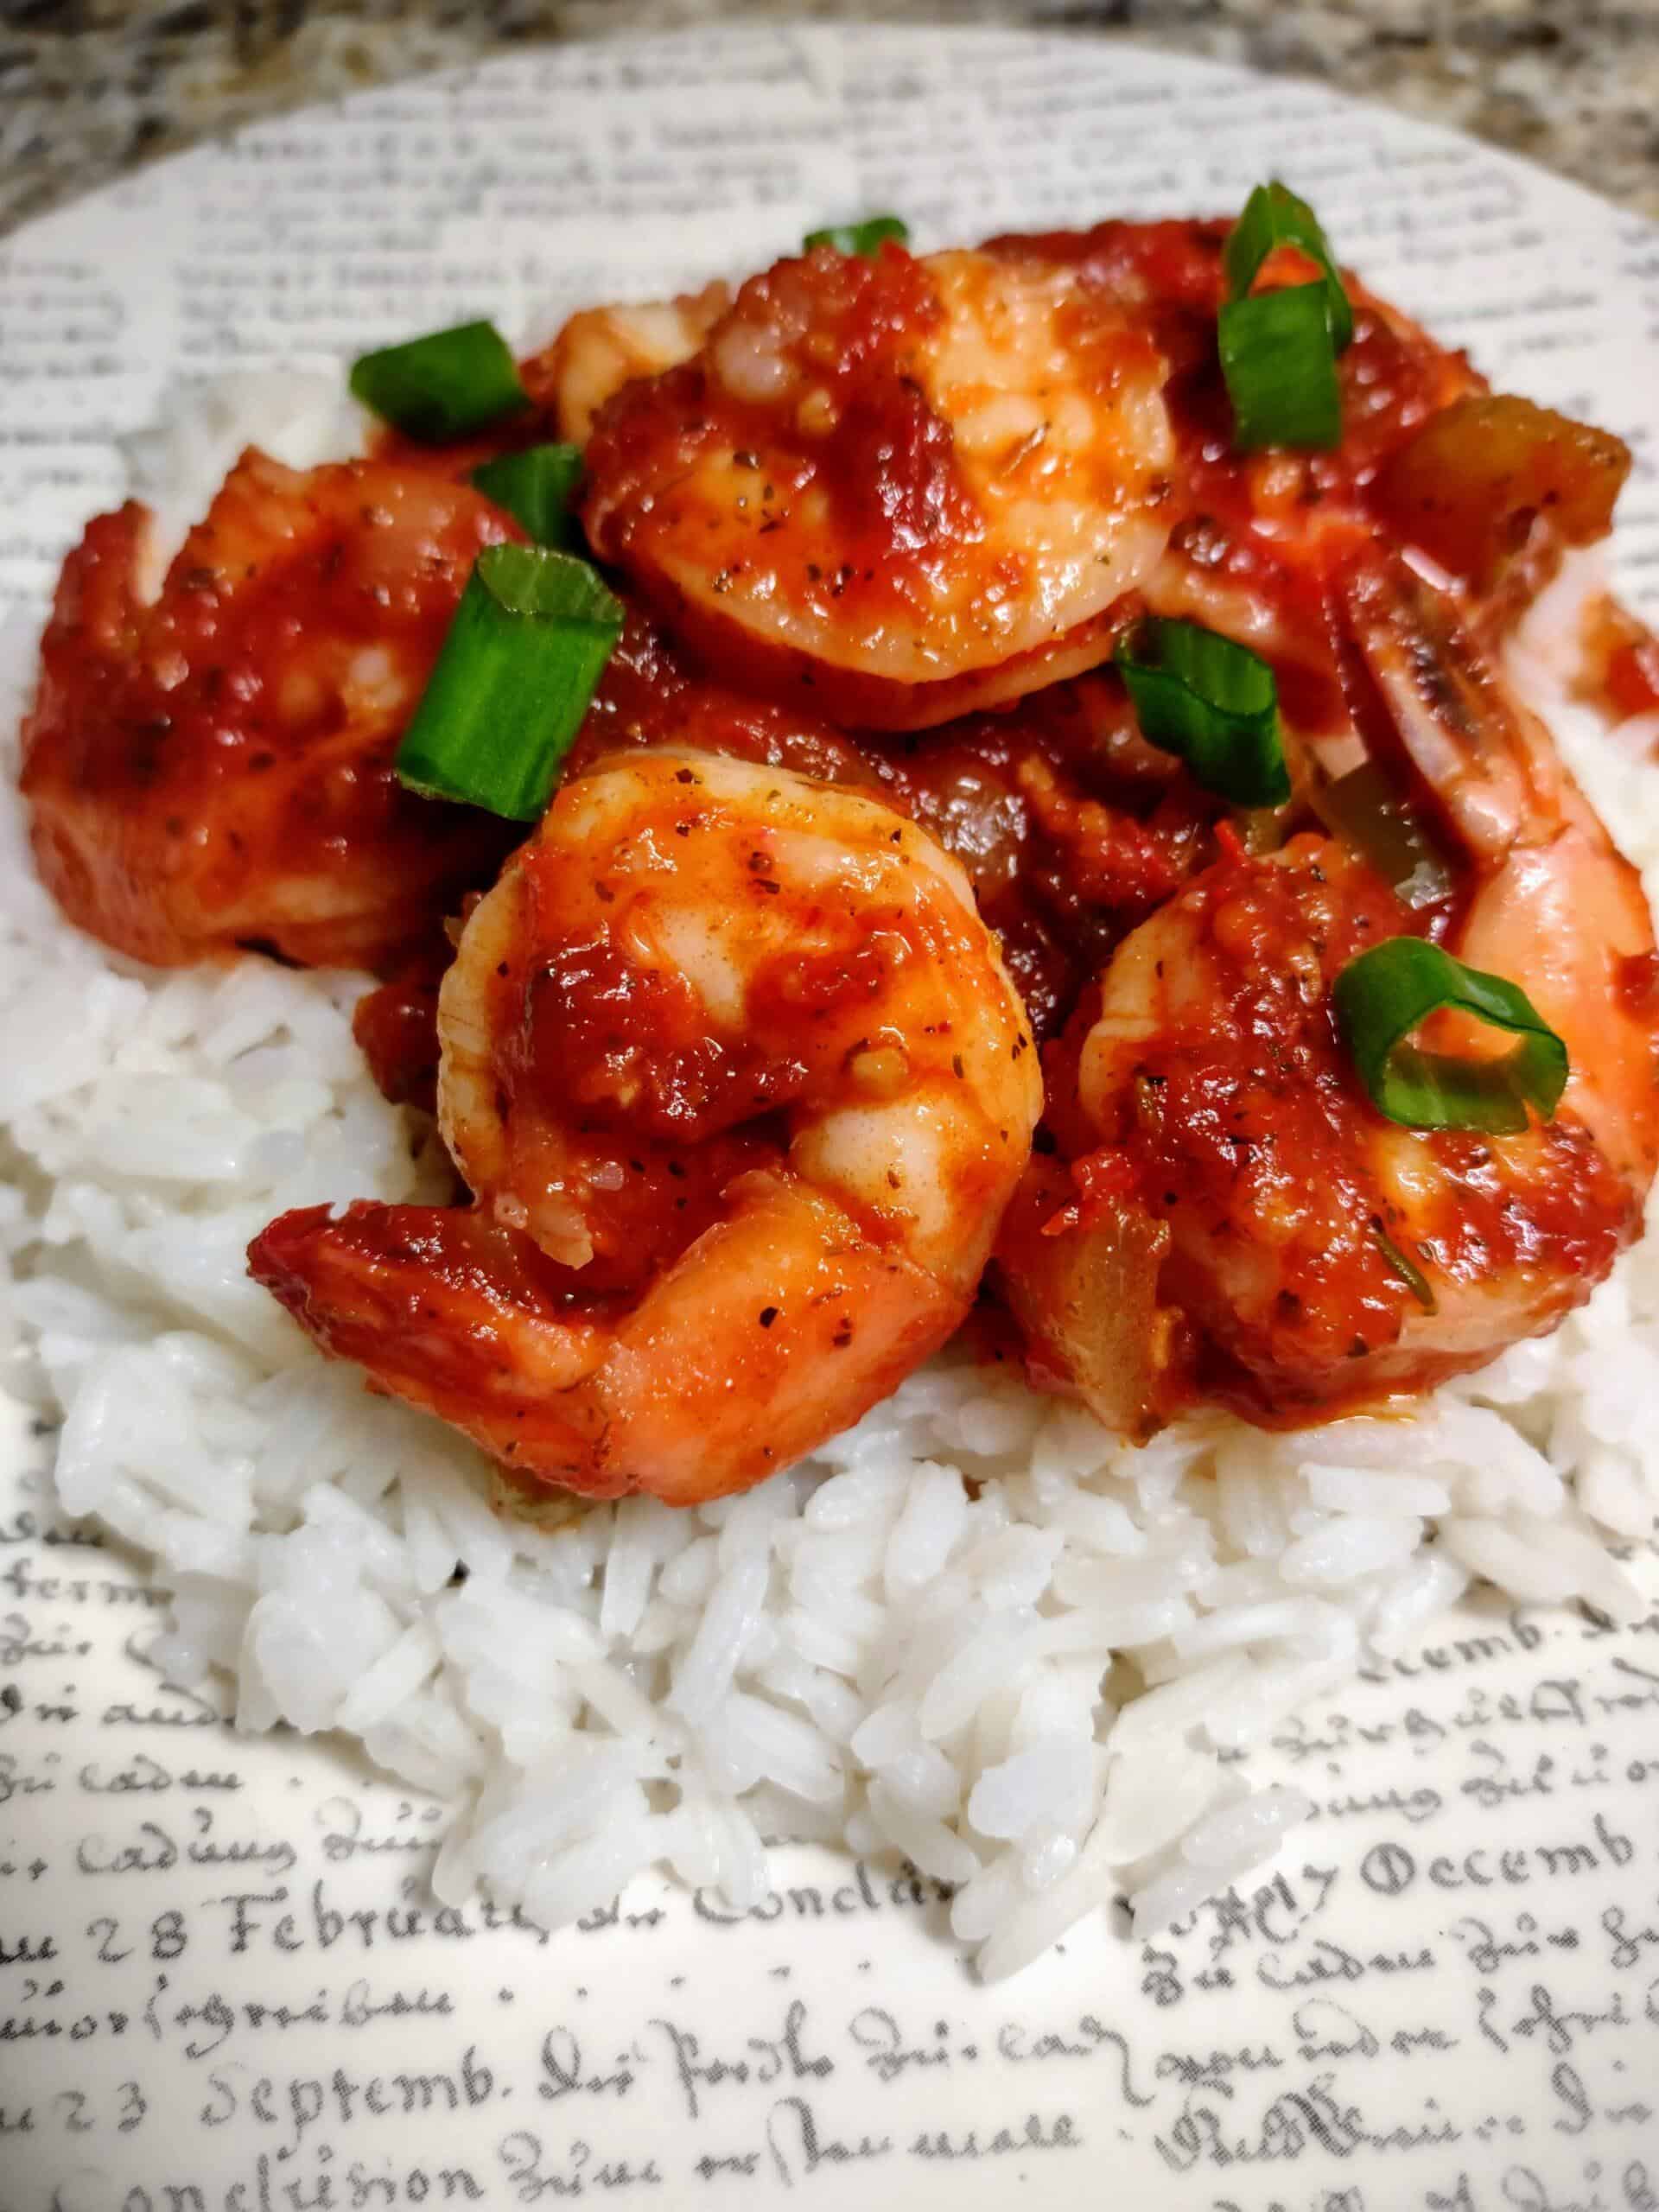 Rice Dishes,Shrimp Dishes,Spicy Foods,Tomato Dishes,Seafood Dishes,Creole Cuisine,Louisiana Dishes,Southern American Dishes,Holy Trinity